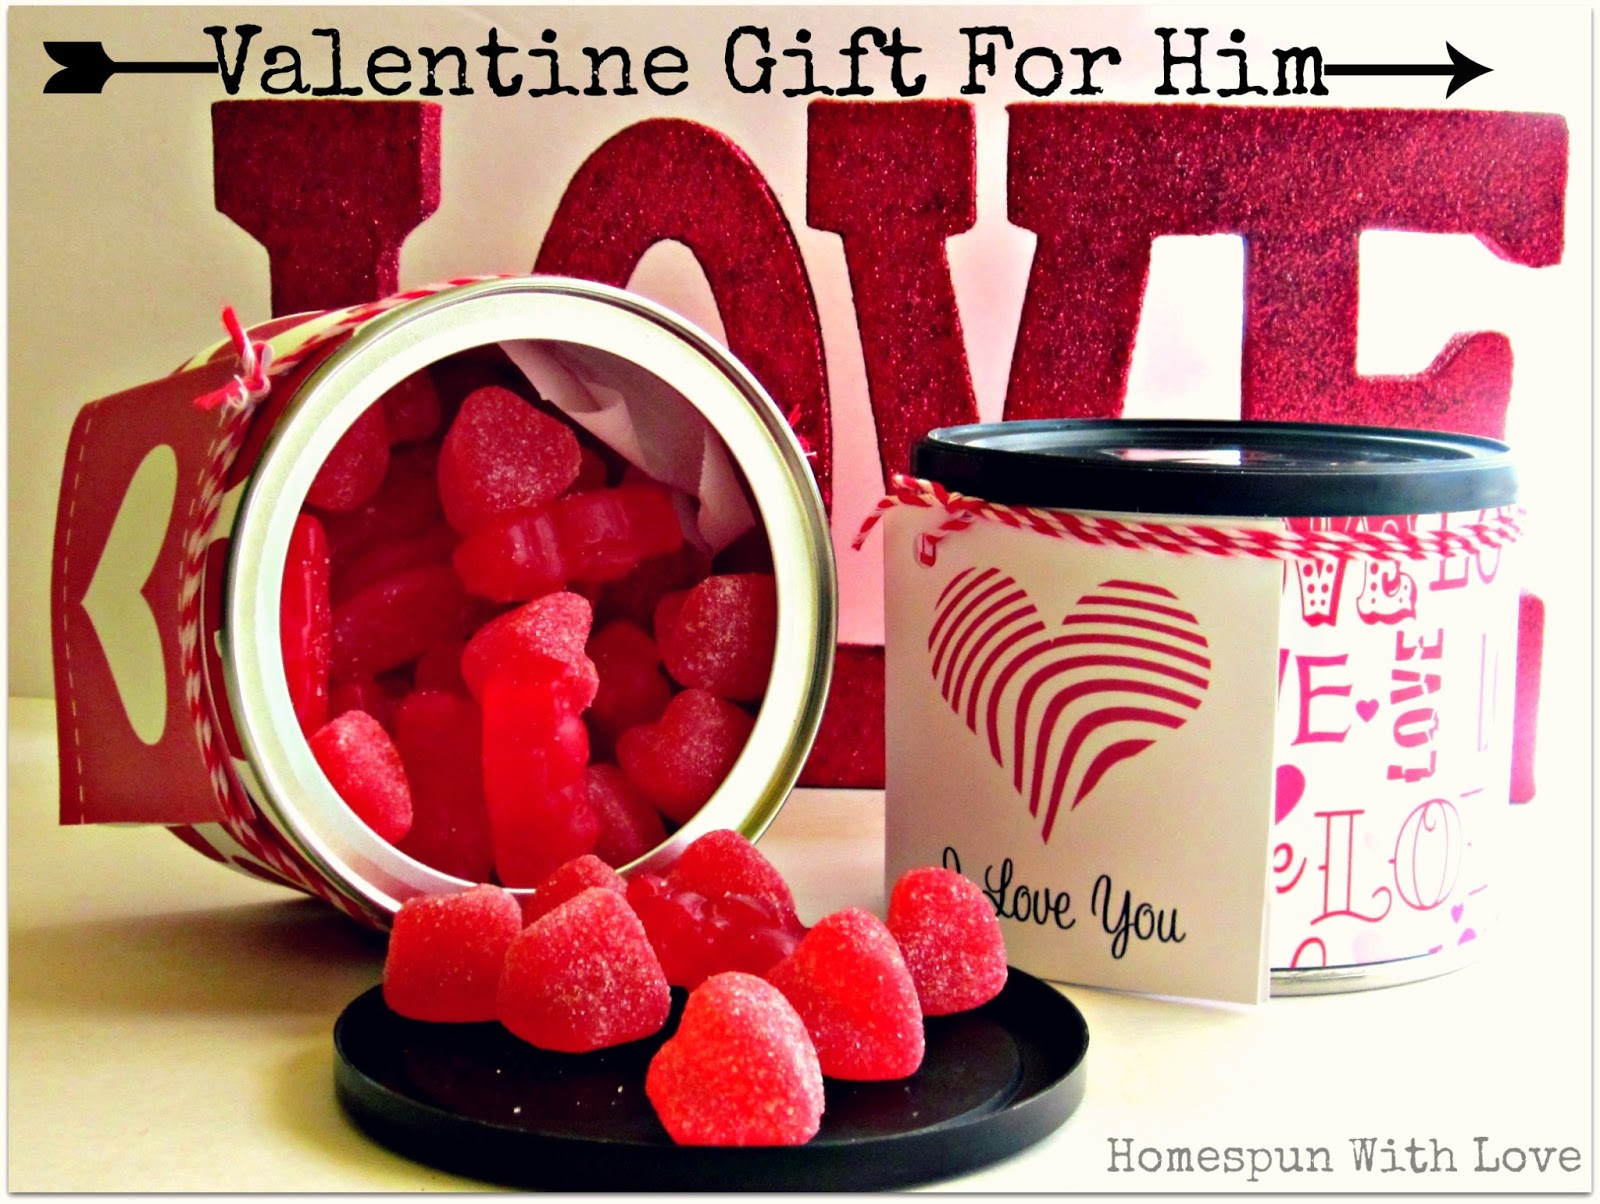 Romantic Gift Ideas For Him Valentines Day
 5 Romantic Valentines Day Gift Ideas For Him – Ezyshine